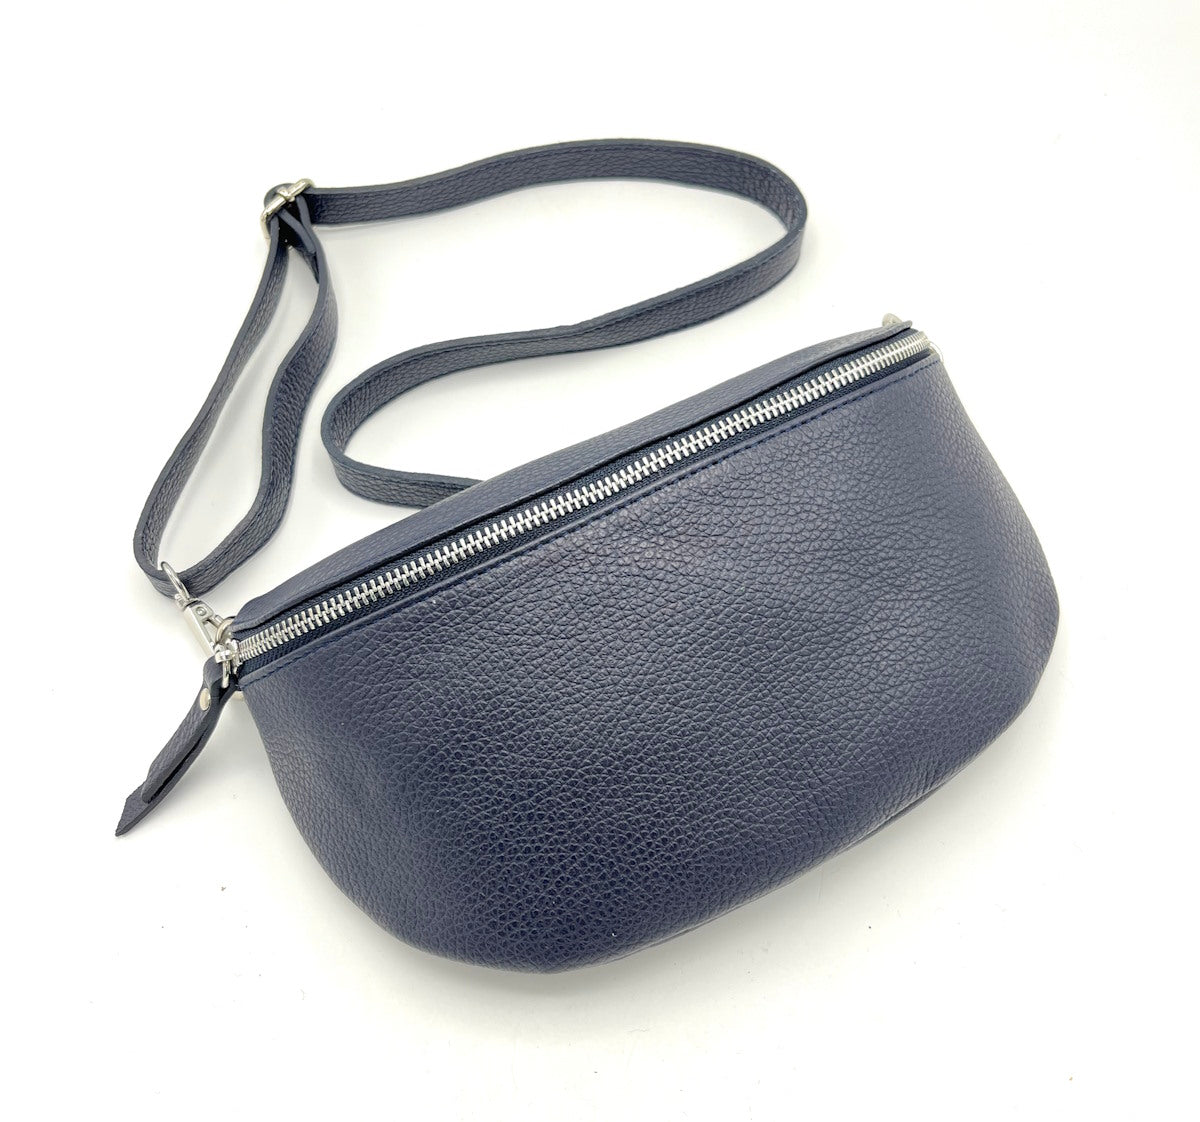 Genuine leather crossbody bag, Made in Italy, art. 112466